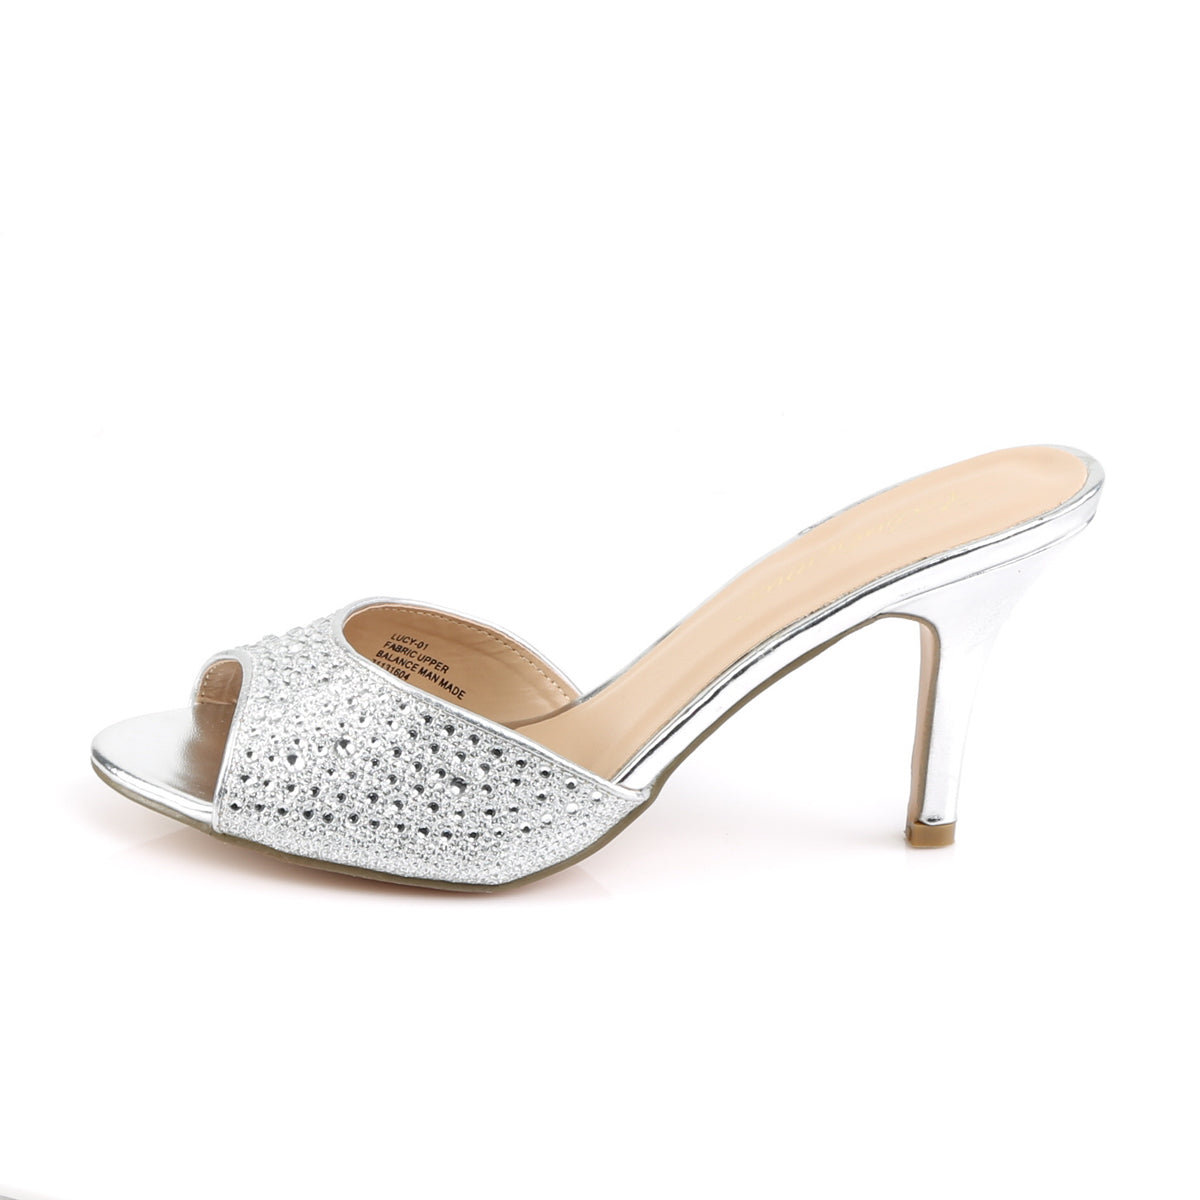 LUCY-01 Fabulicious Silver Glitter Mesh Fabric Shoes [Sexy Shoes]